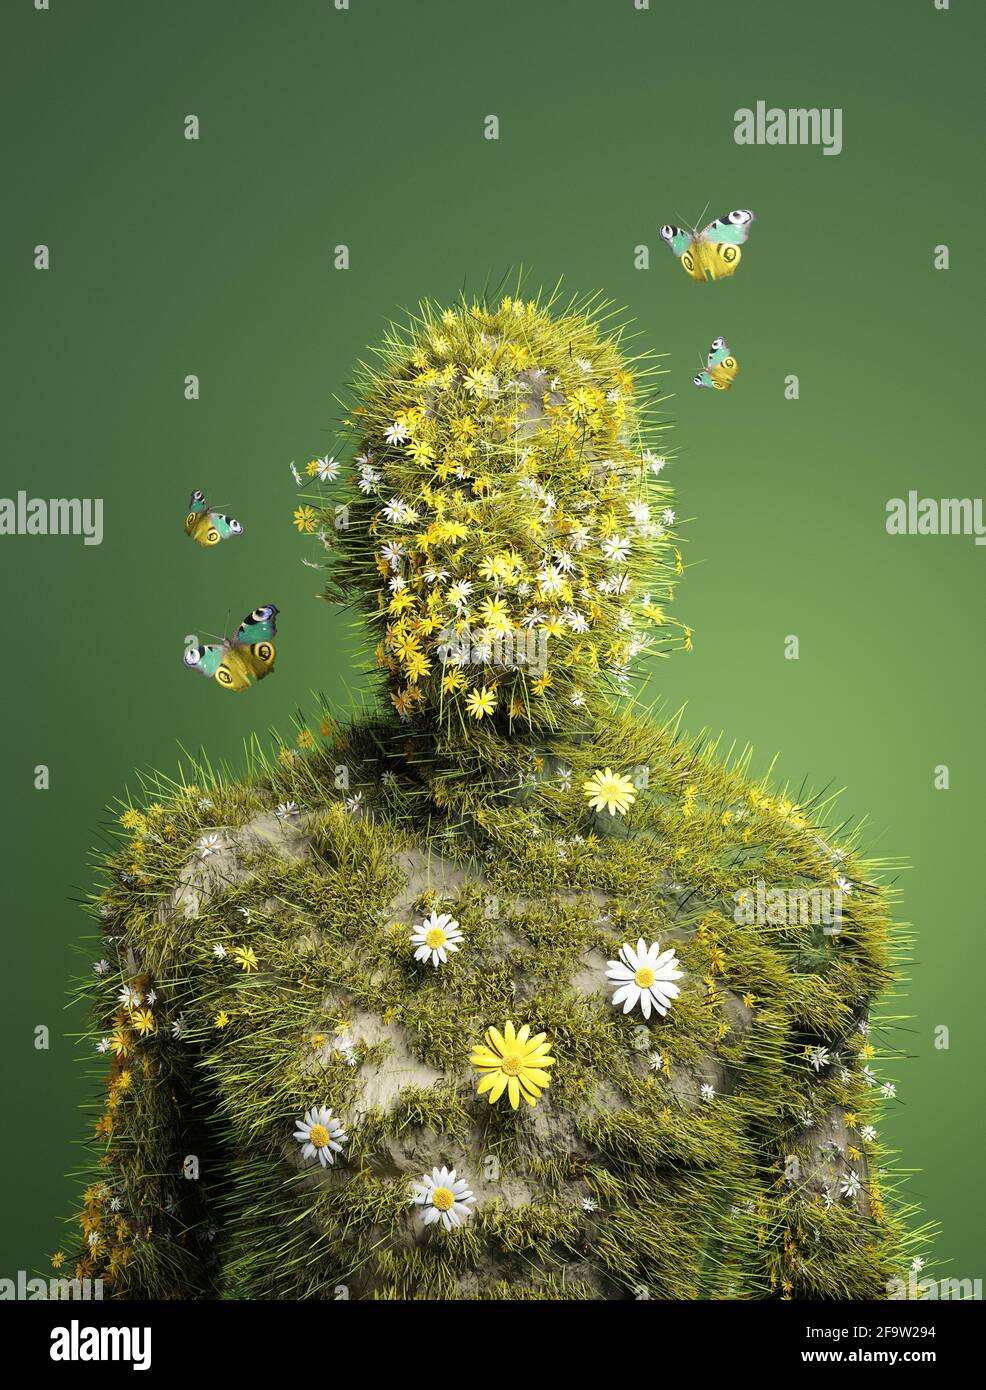 A human abstract figure made from natural organic materials such as wildflowers. Green living, People and the environment 3D illustration. Stock Photo